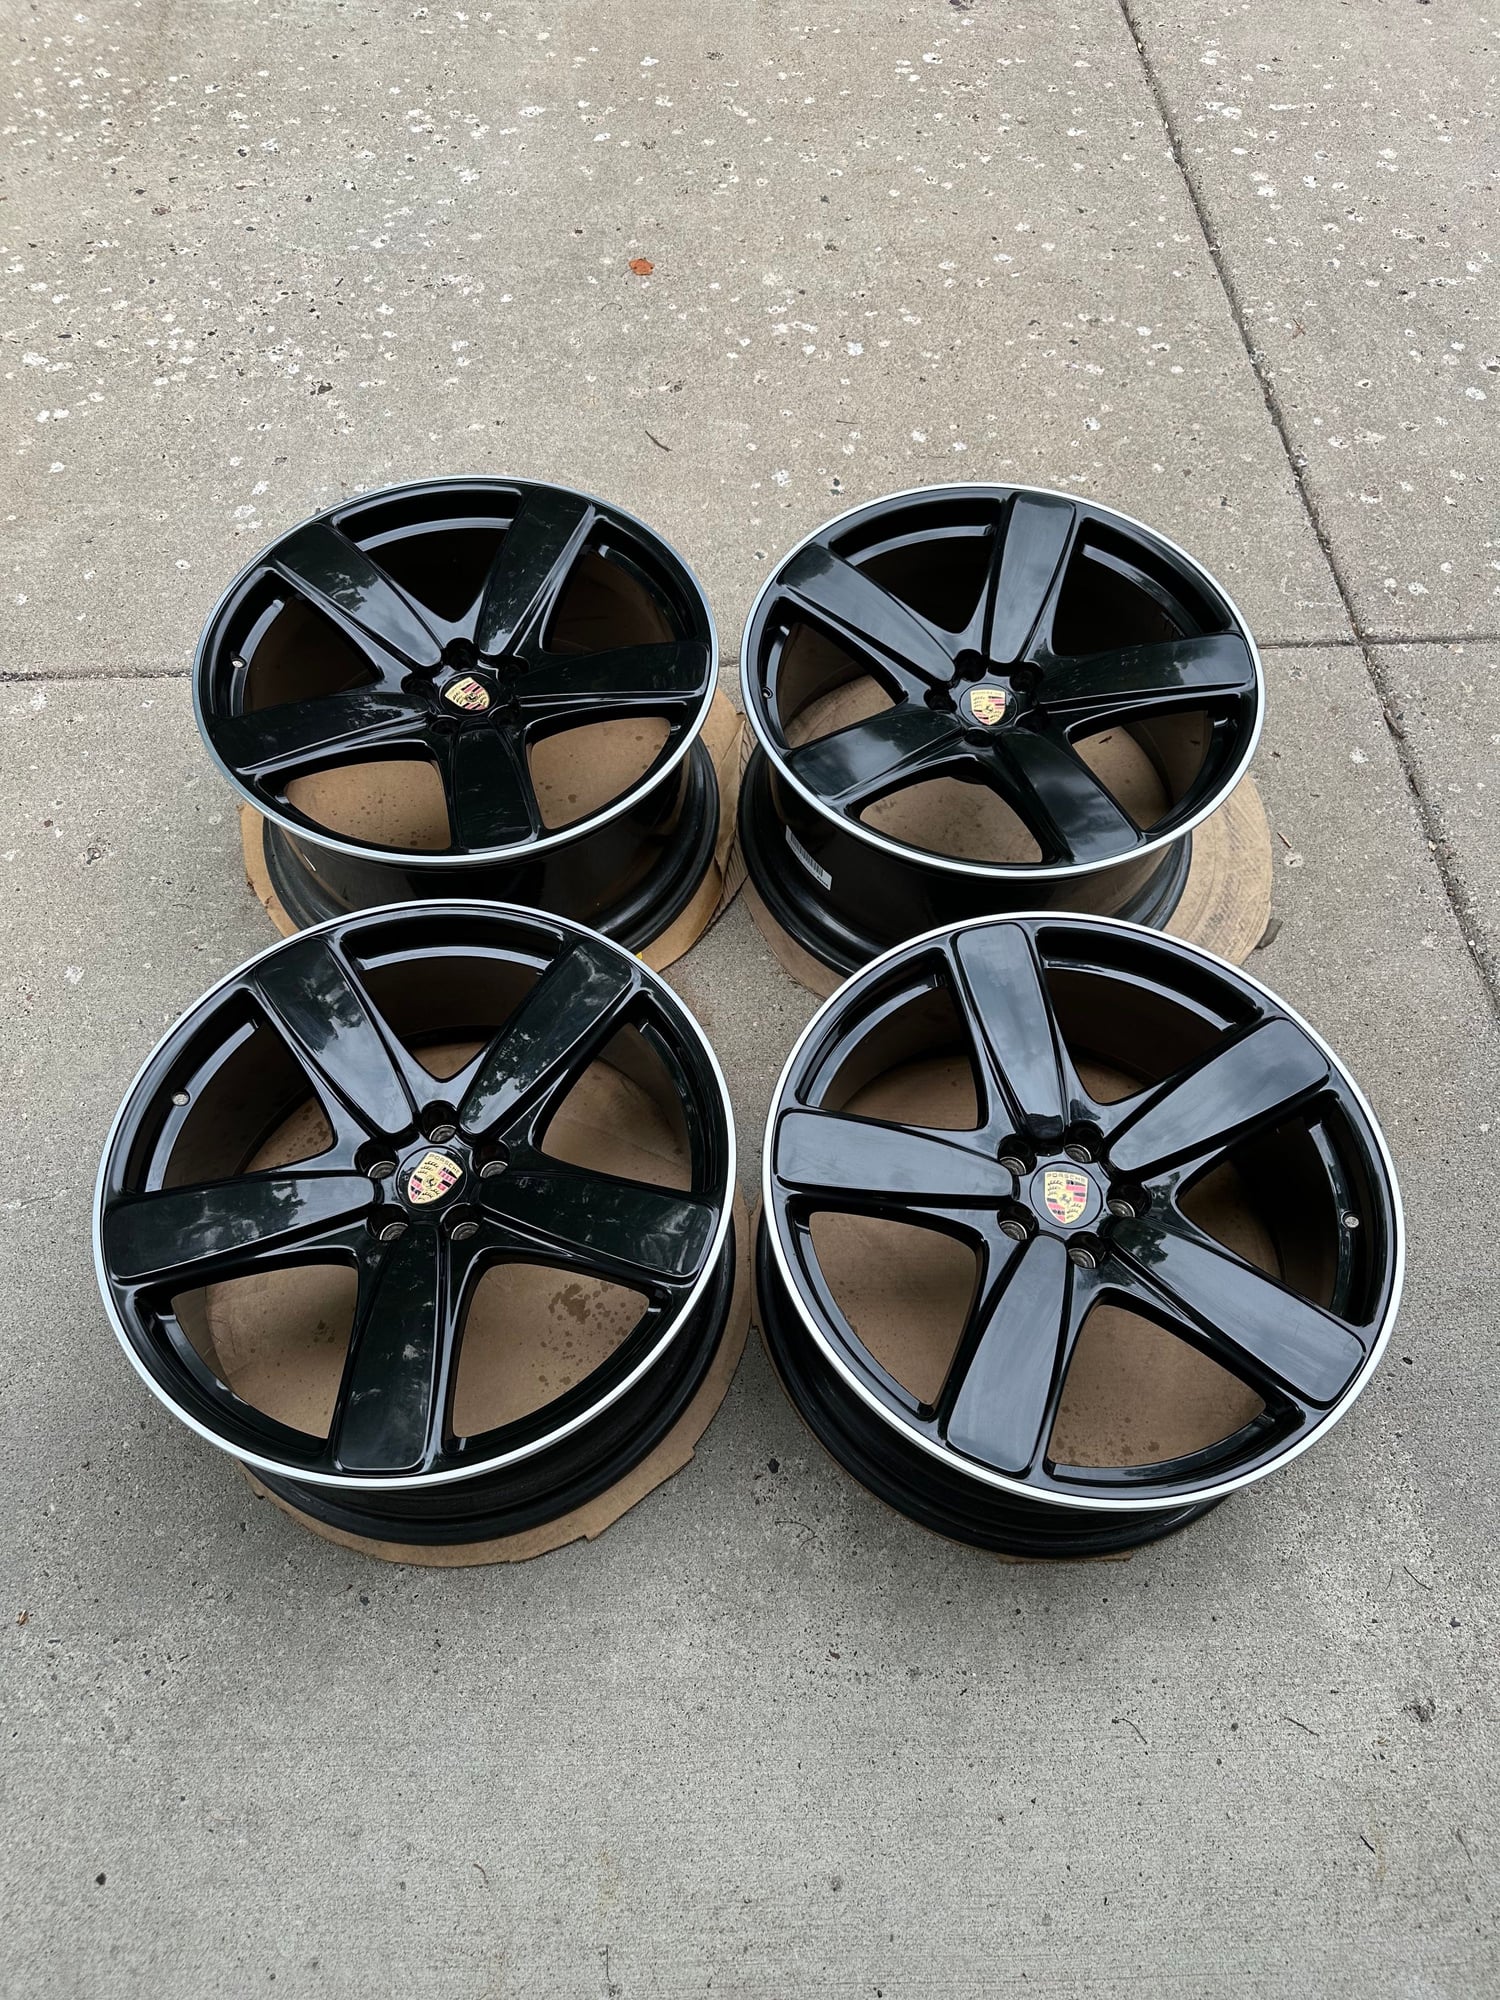 2020 Porsche Cayenne - OEM 21" Porsche Macan Sport Classic Wheels - Excellent - 95B- Black/Polished - Wheels and Tires/Axles - $3,500 - Plymouth, MN 55447, United States